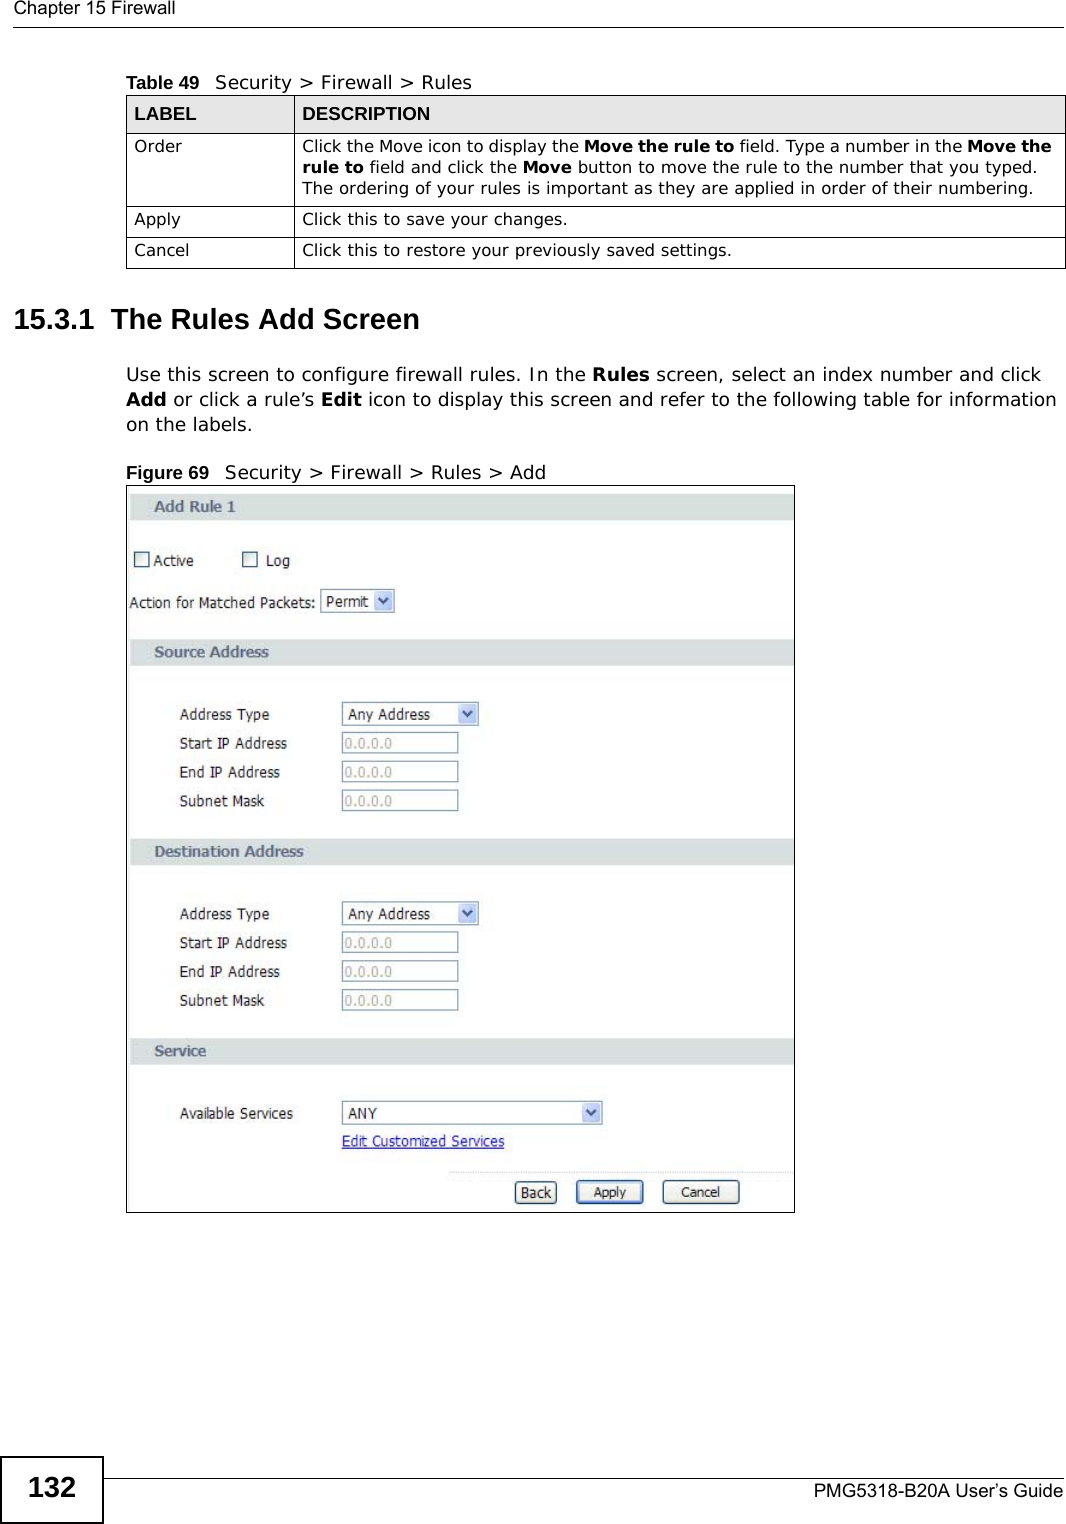 Chapter 15 FirewallPMG5318-B20A User’s Guide13215.3.1  The Rules Add ScreenUse this screen to configure firewall rules. In the Rules screen, select an index number and click Add or click a rule’s Edit icon to display this screen and refer to the following table for information on the labels.Figure 69   Security &gt; Firewall &gt; Rules &gt; Add Order Click the Move icon to display the Move the rule to field. Type a number in the Move the rule to field and click the Move button to move the rule to the number that you typed. The ordering of your rules is important as they are applied in order of their numbering.Apply Click this to save your changes.Cancel Click this to restore your previously saved settings.Table 49   Security &gt; Firewall &gt; RulesLABEL DESCRIPTION